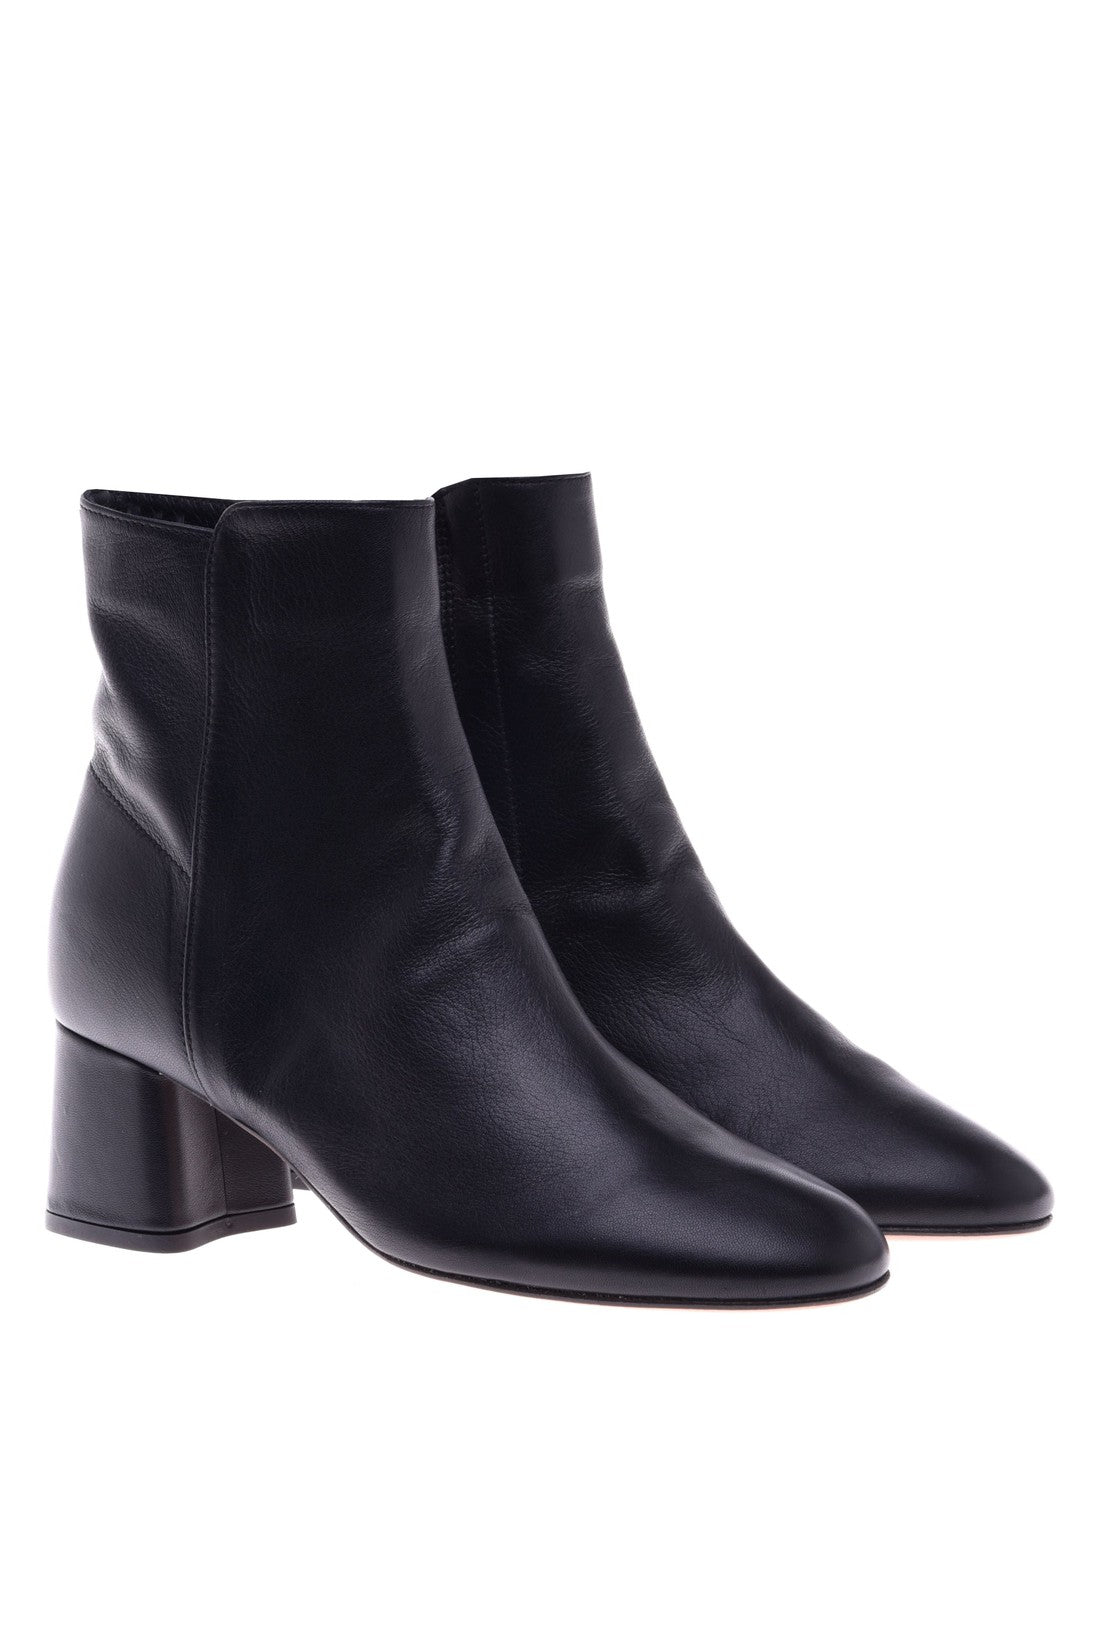 Ankle boot in black nappa leather